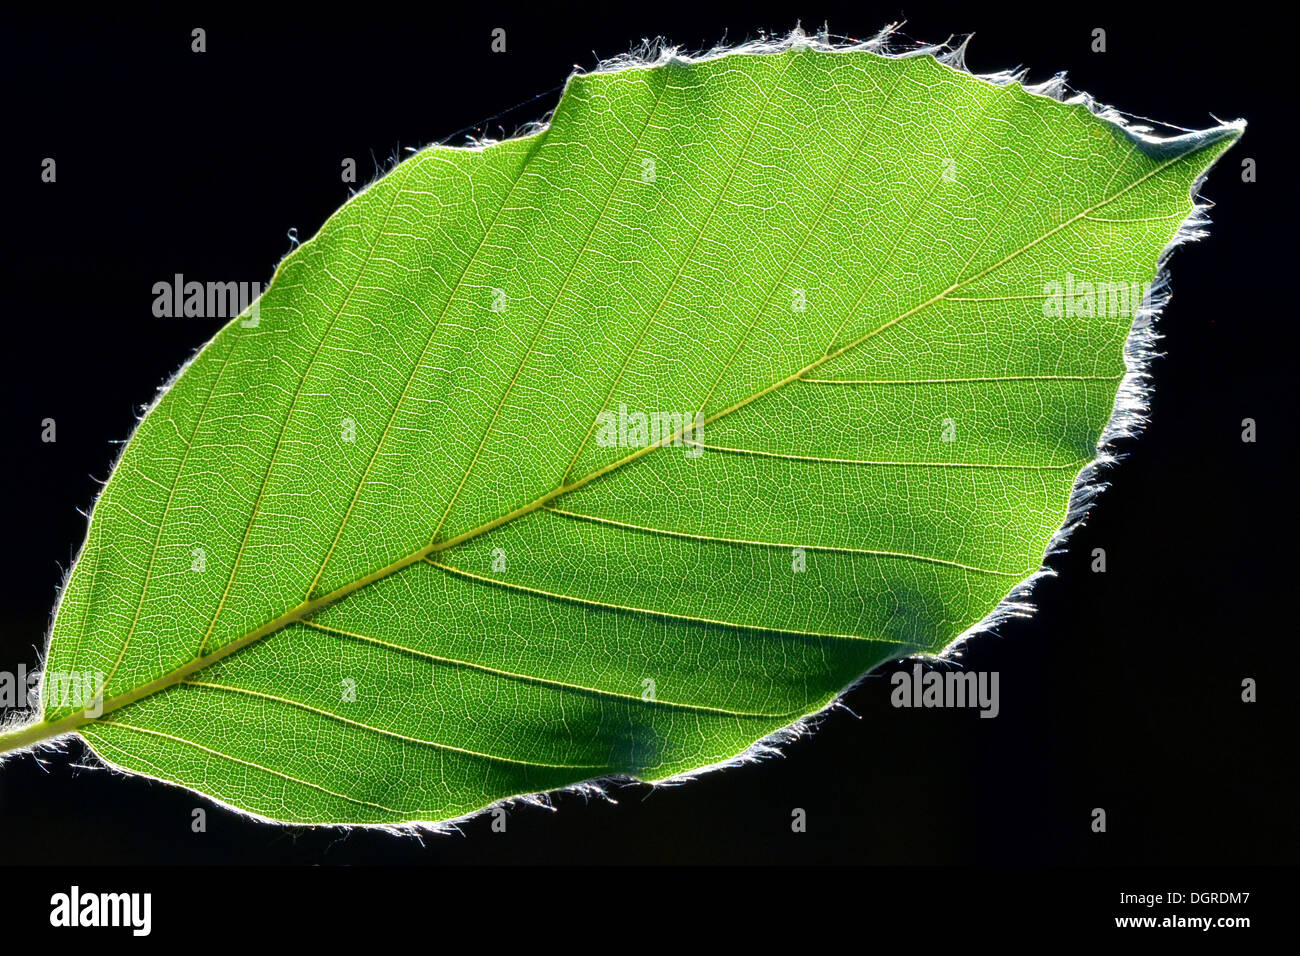 Leaf of a beech (Fagus sylvatica) with fine hairs Stock Photo